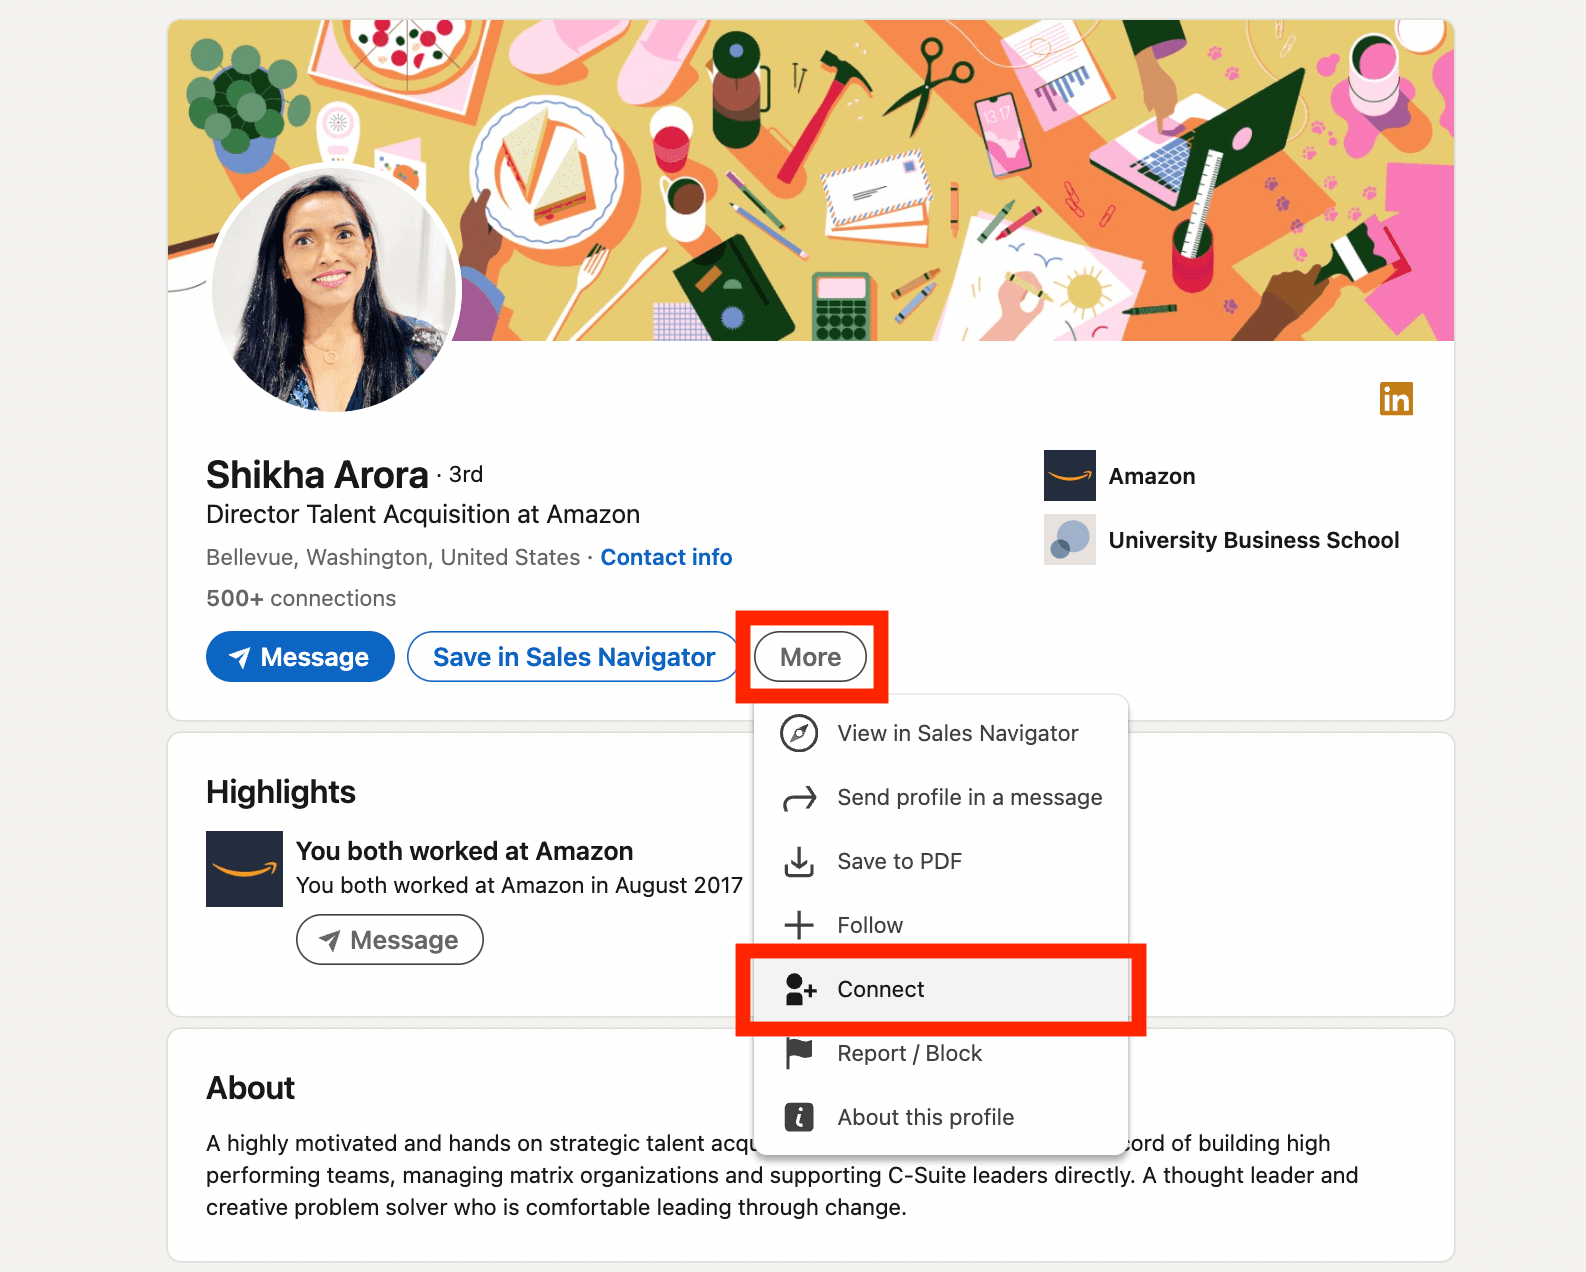 how to connect with someone on linkedin - image8.png